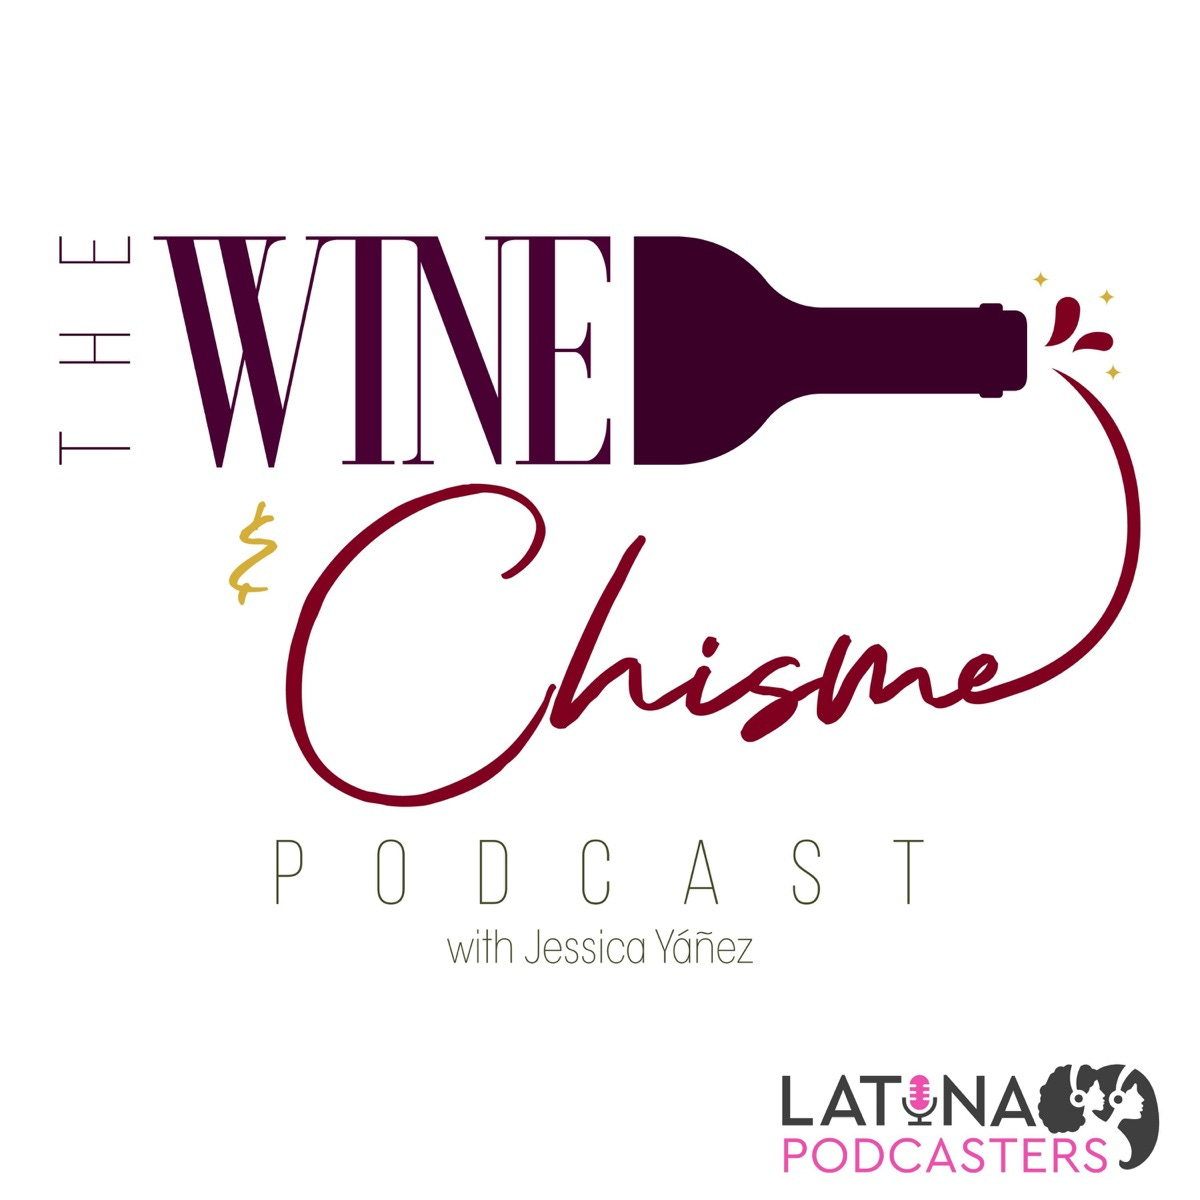 The Wine & Chisme podcast cover art